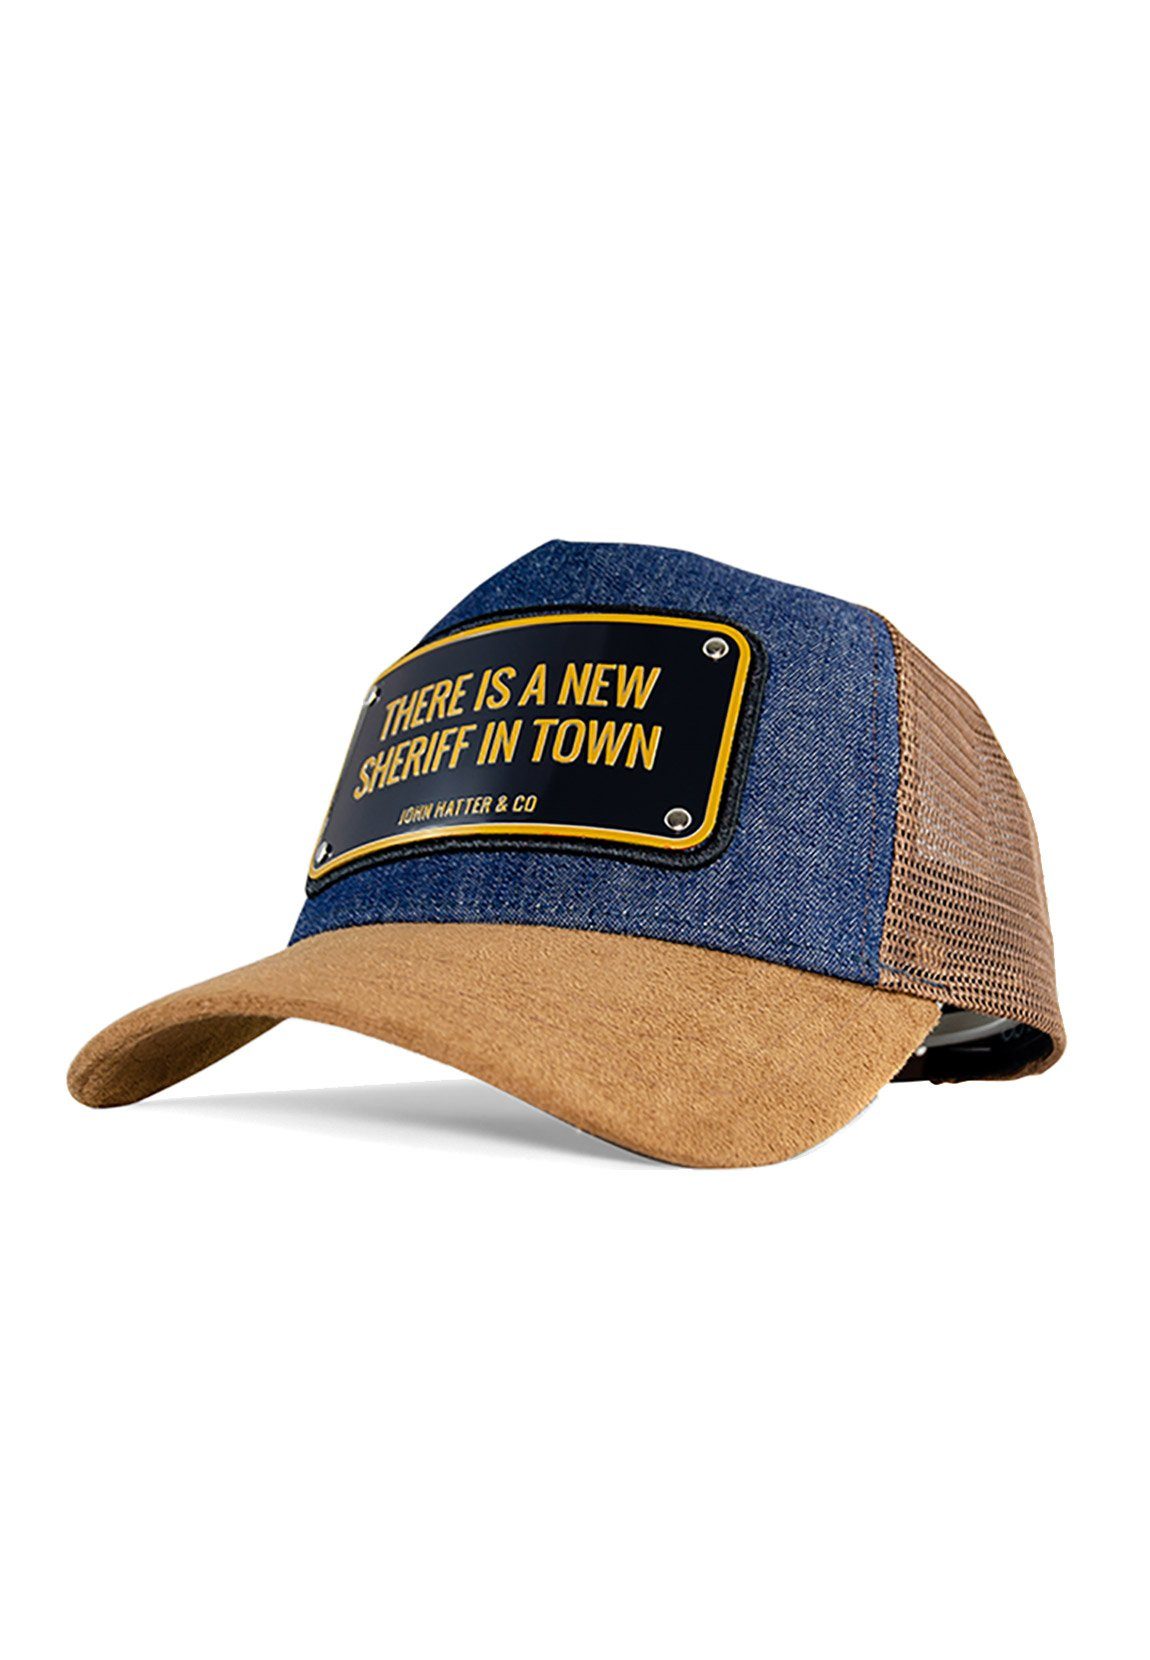 John Hatter & Co. Trucker Cap John Hatter & Co Trucker Cap THERE IS A NEW  SHERIFF IN TOWN Blau Braun